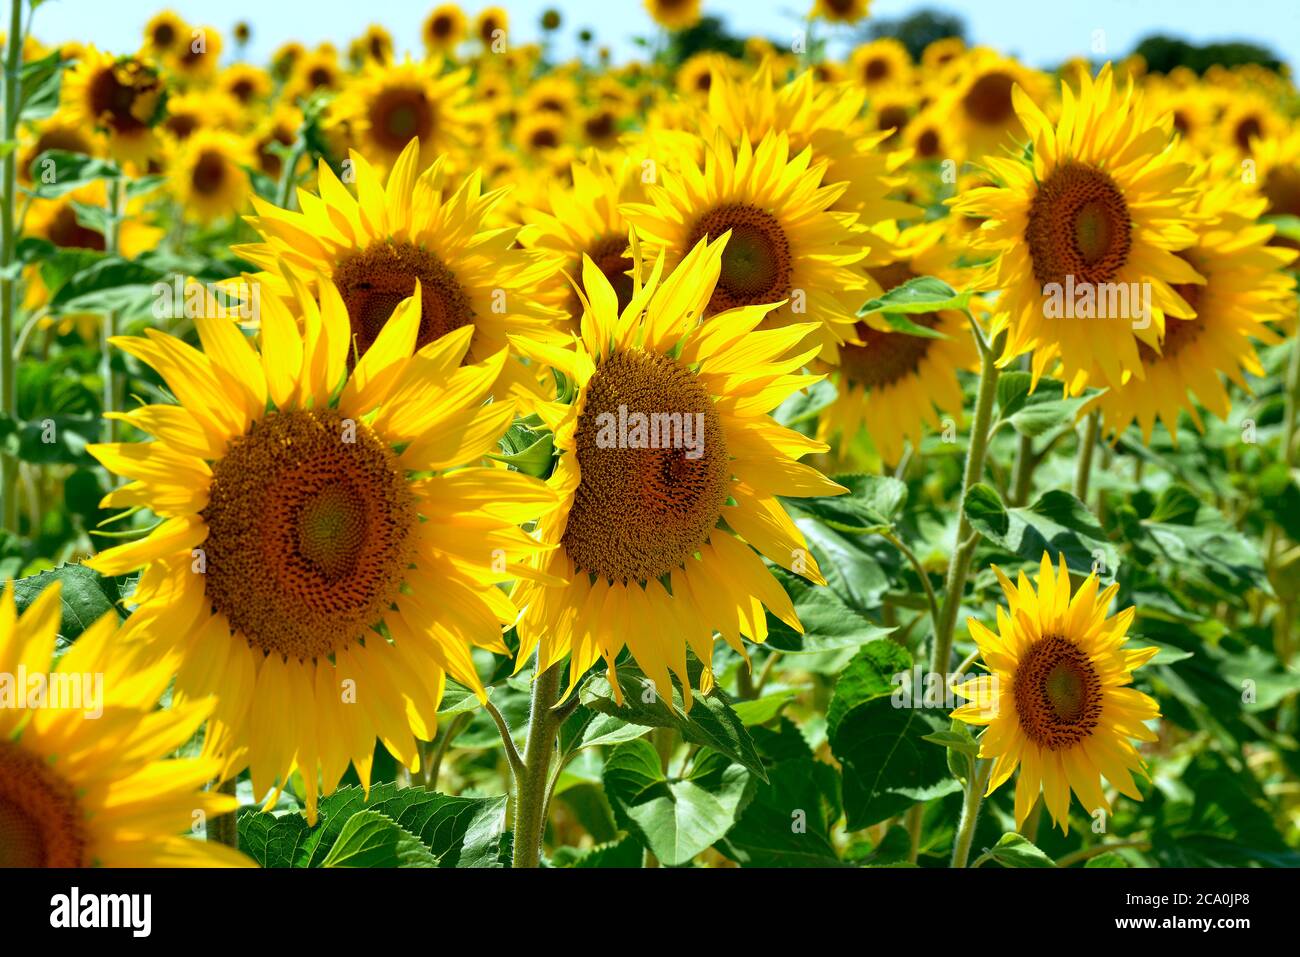 Closeup sunflowers (Helianthus annuus) on the famous Valensole plateau, a commune in the Alpes-de-Haute-Provence department in southeastern France Stock Photo